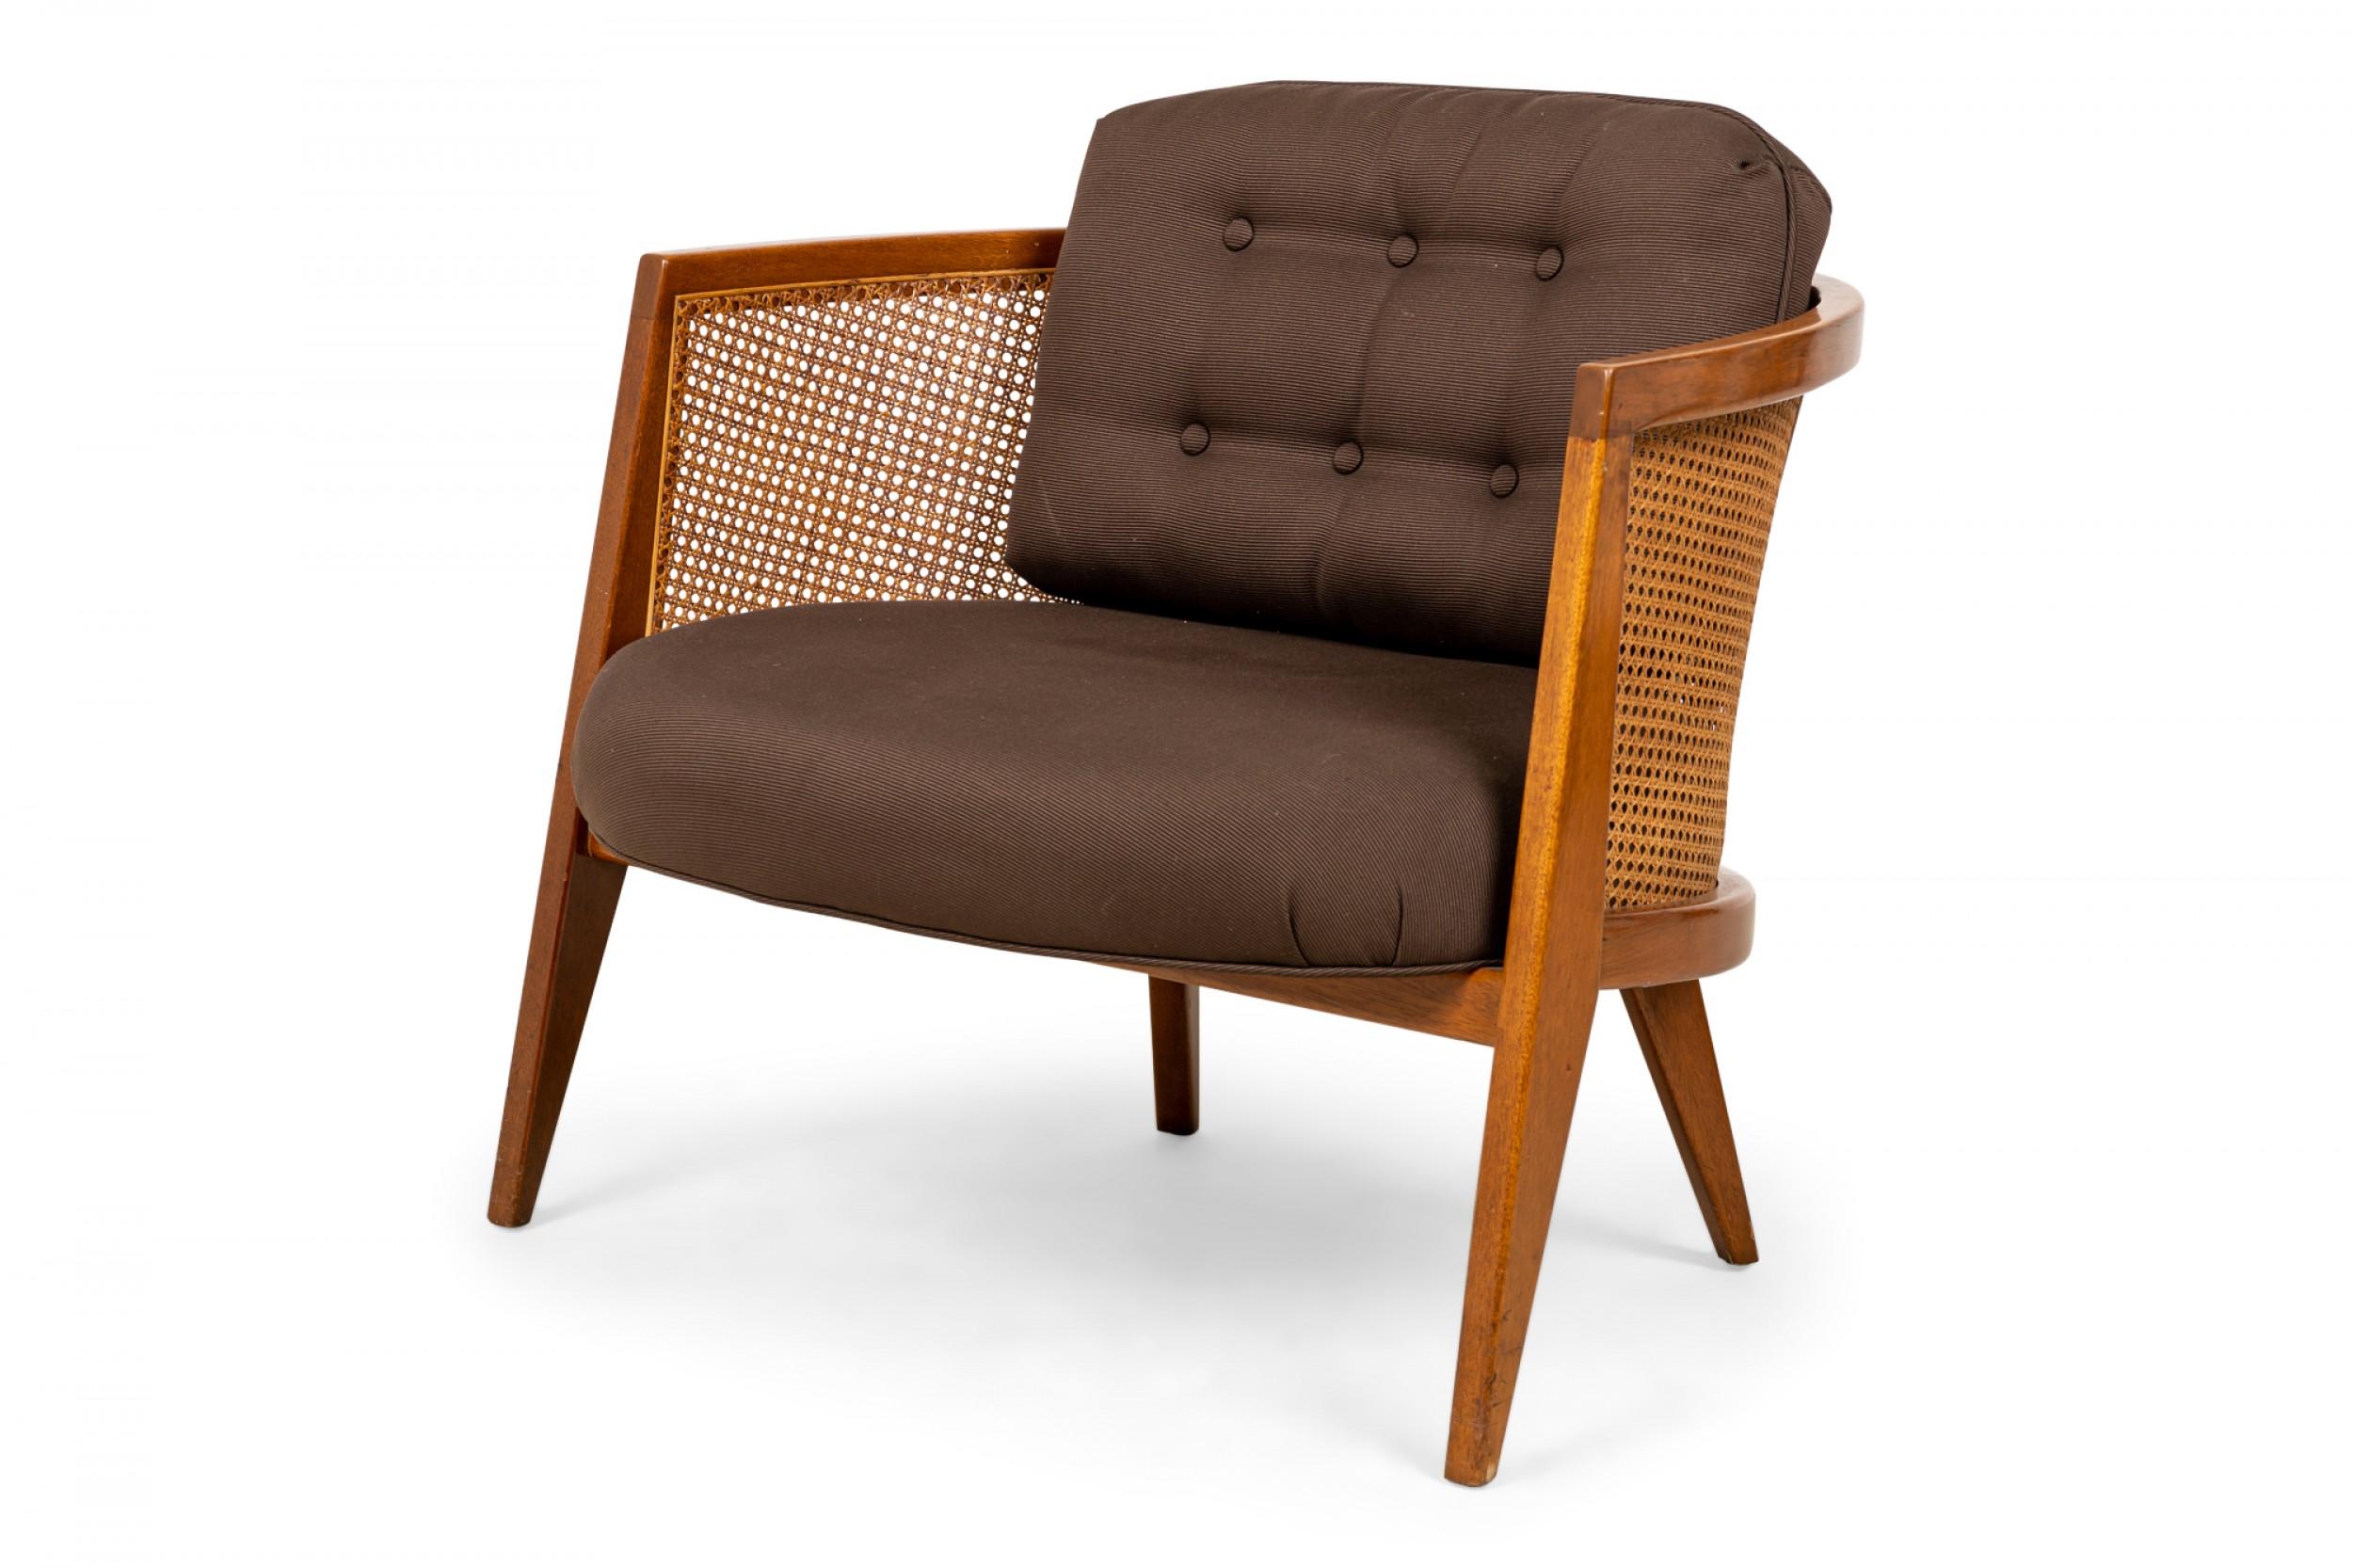 Harvey Probber Wood, Caning, and Brown Fabric Upholstered Hoop Lounge Chair